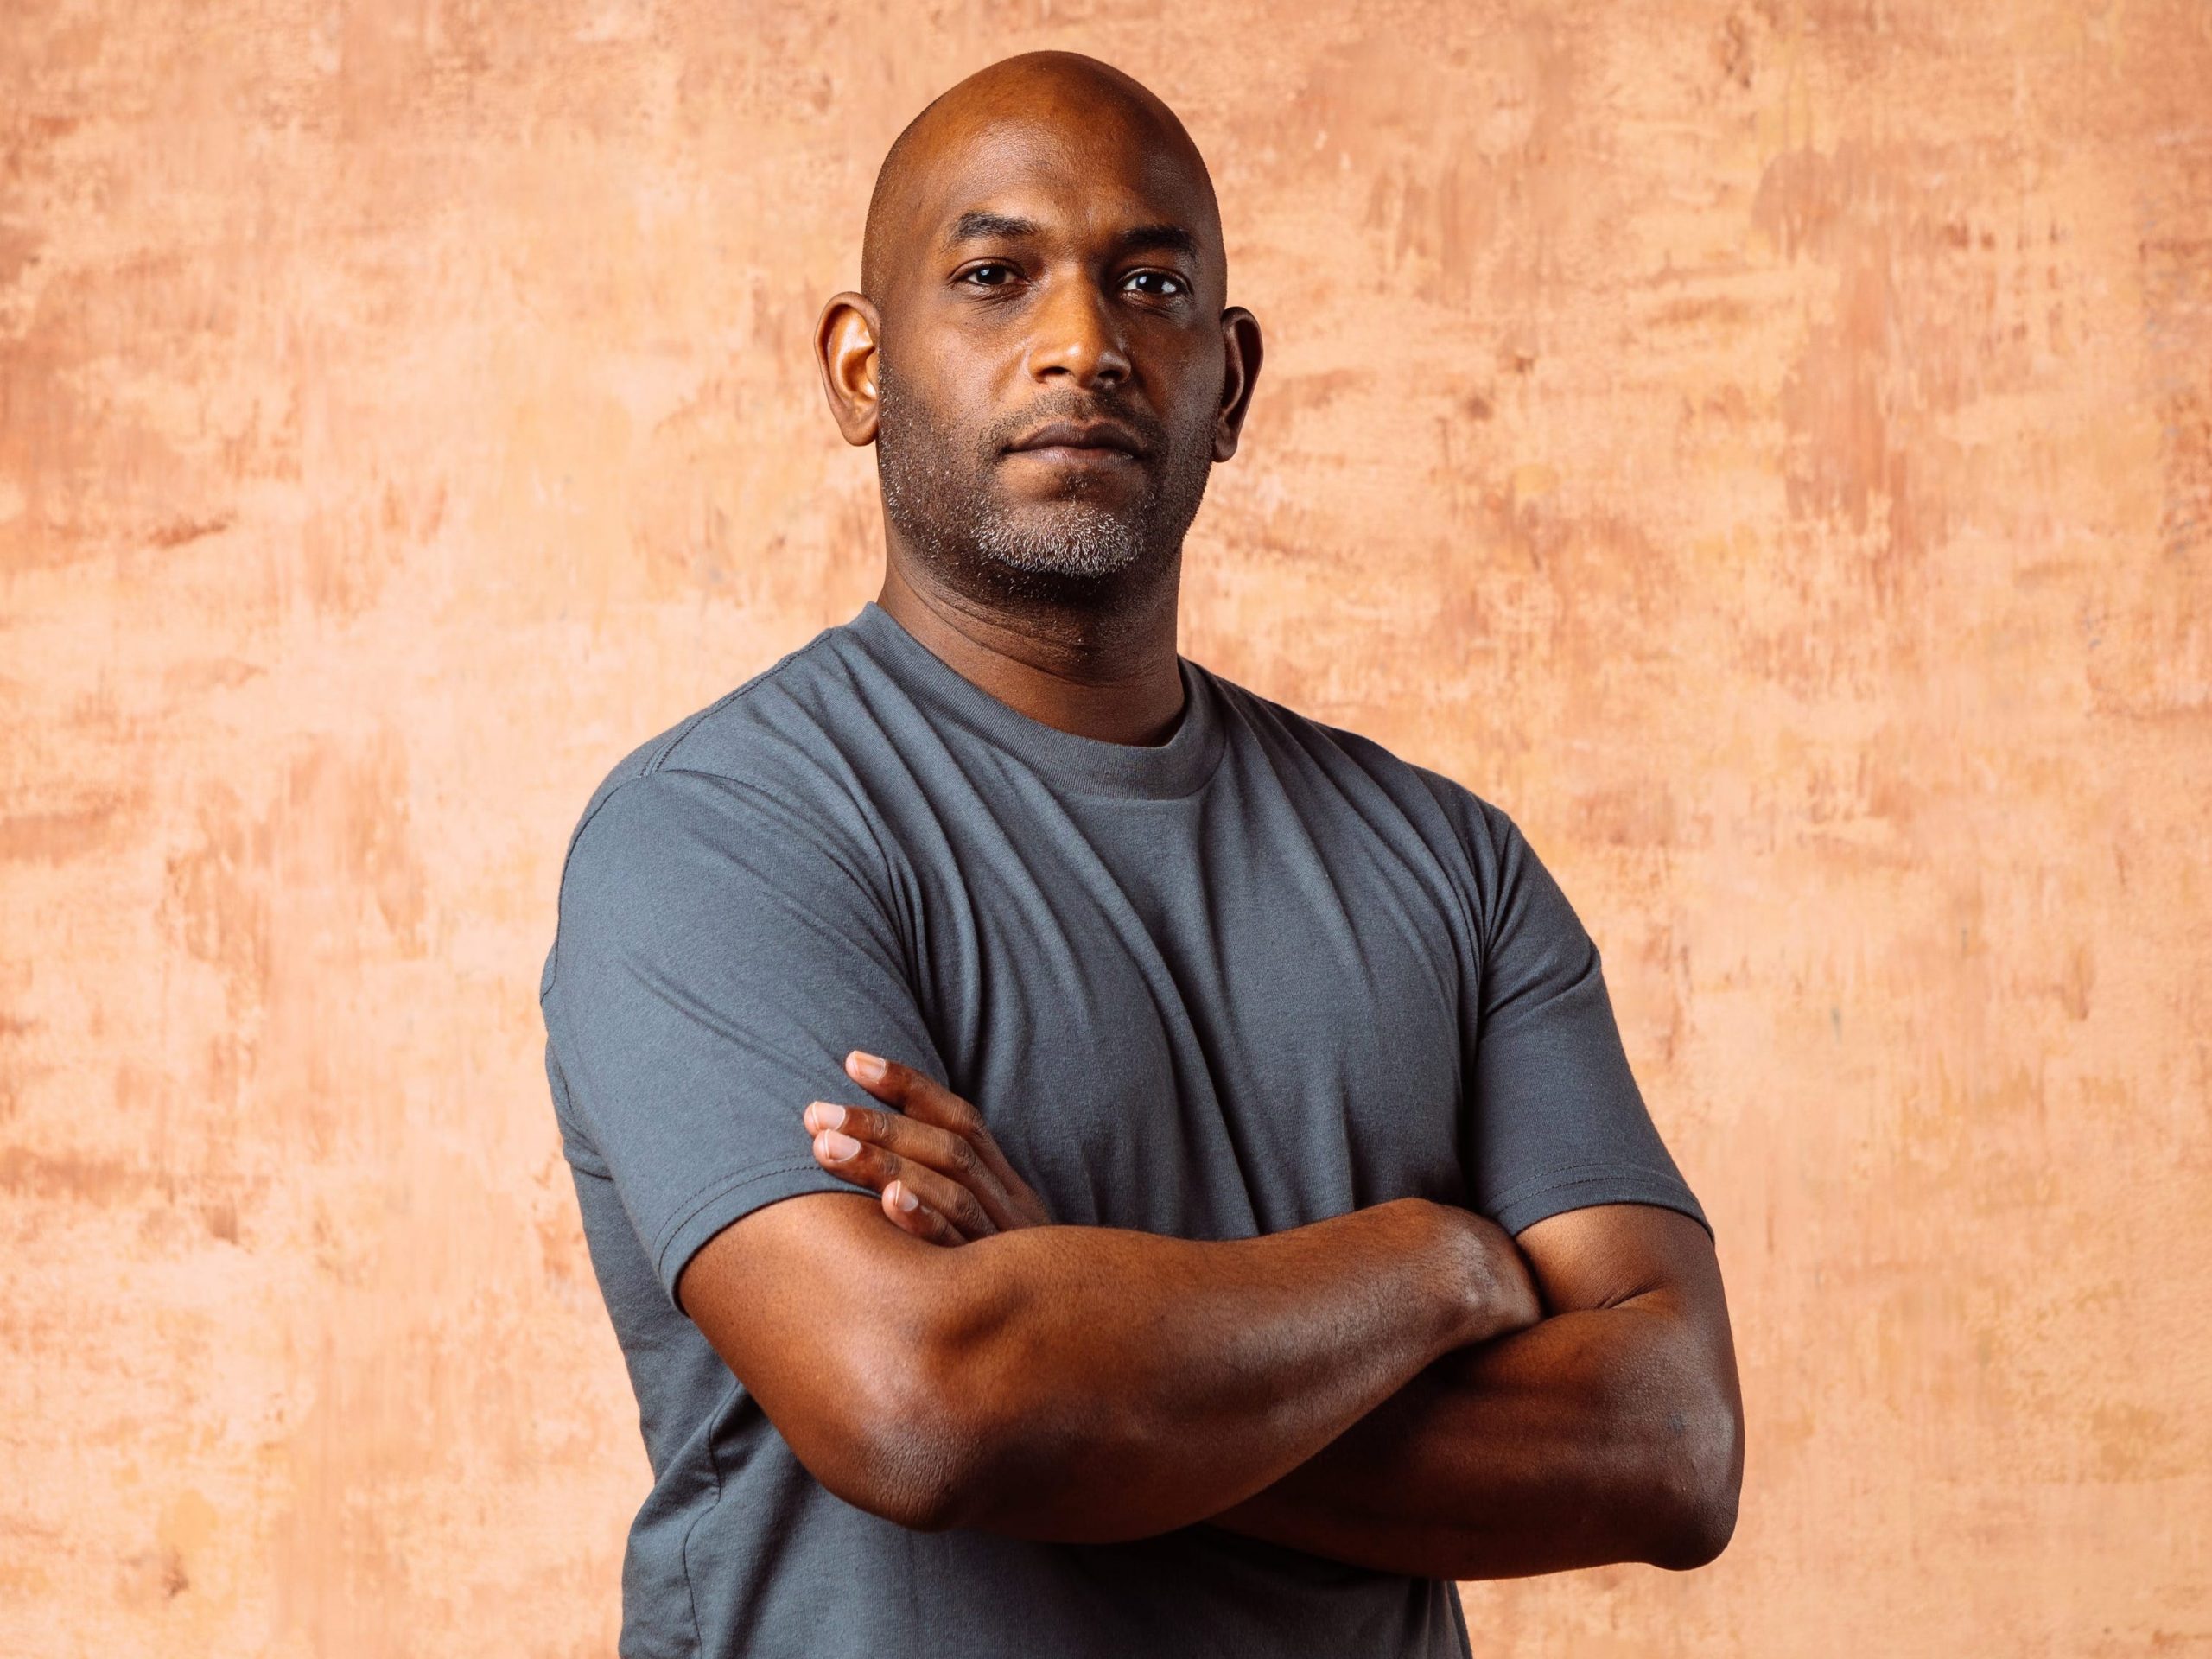 Kelsey Hightower, principle engineer at Google and self-taught developer. His arms are crossed and he's wearing a grey shirt in front of a textured brown background.